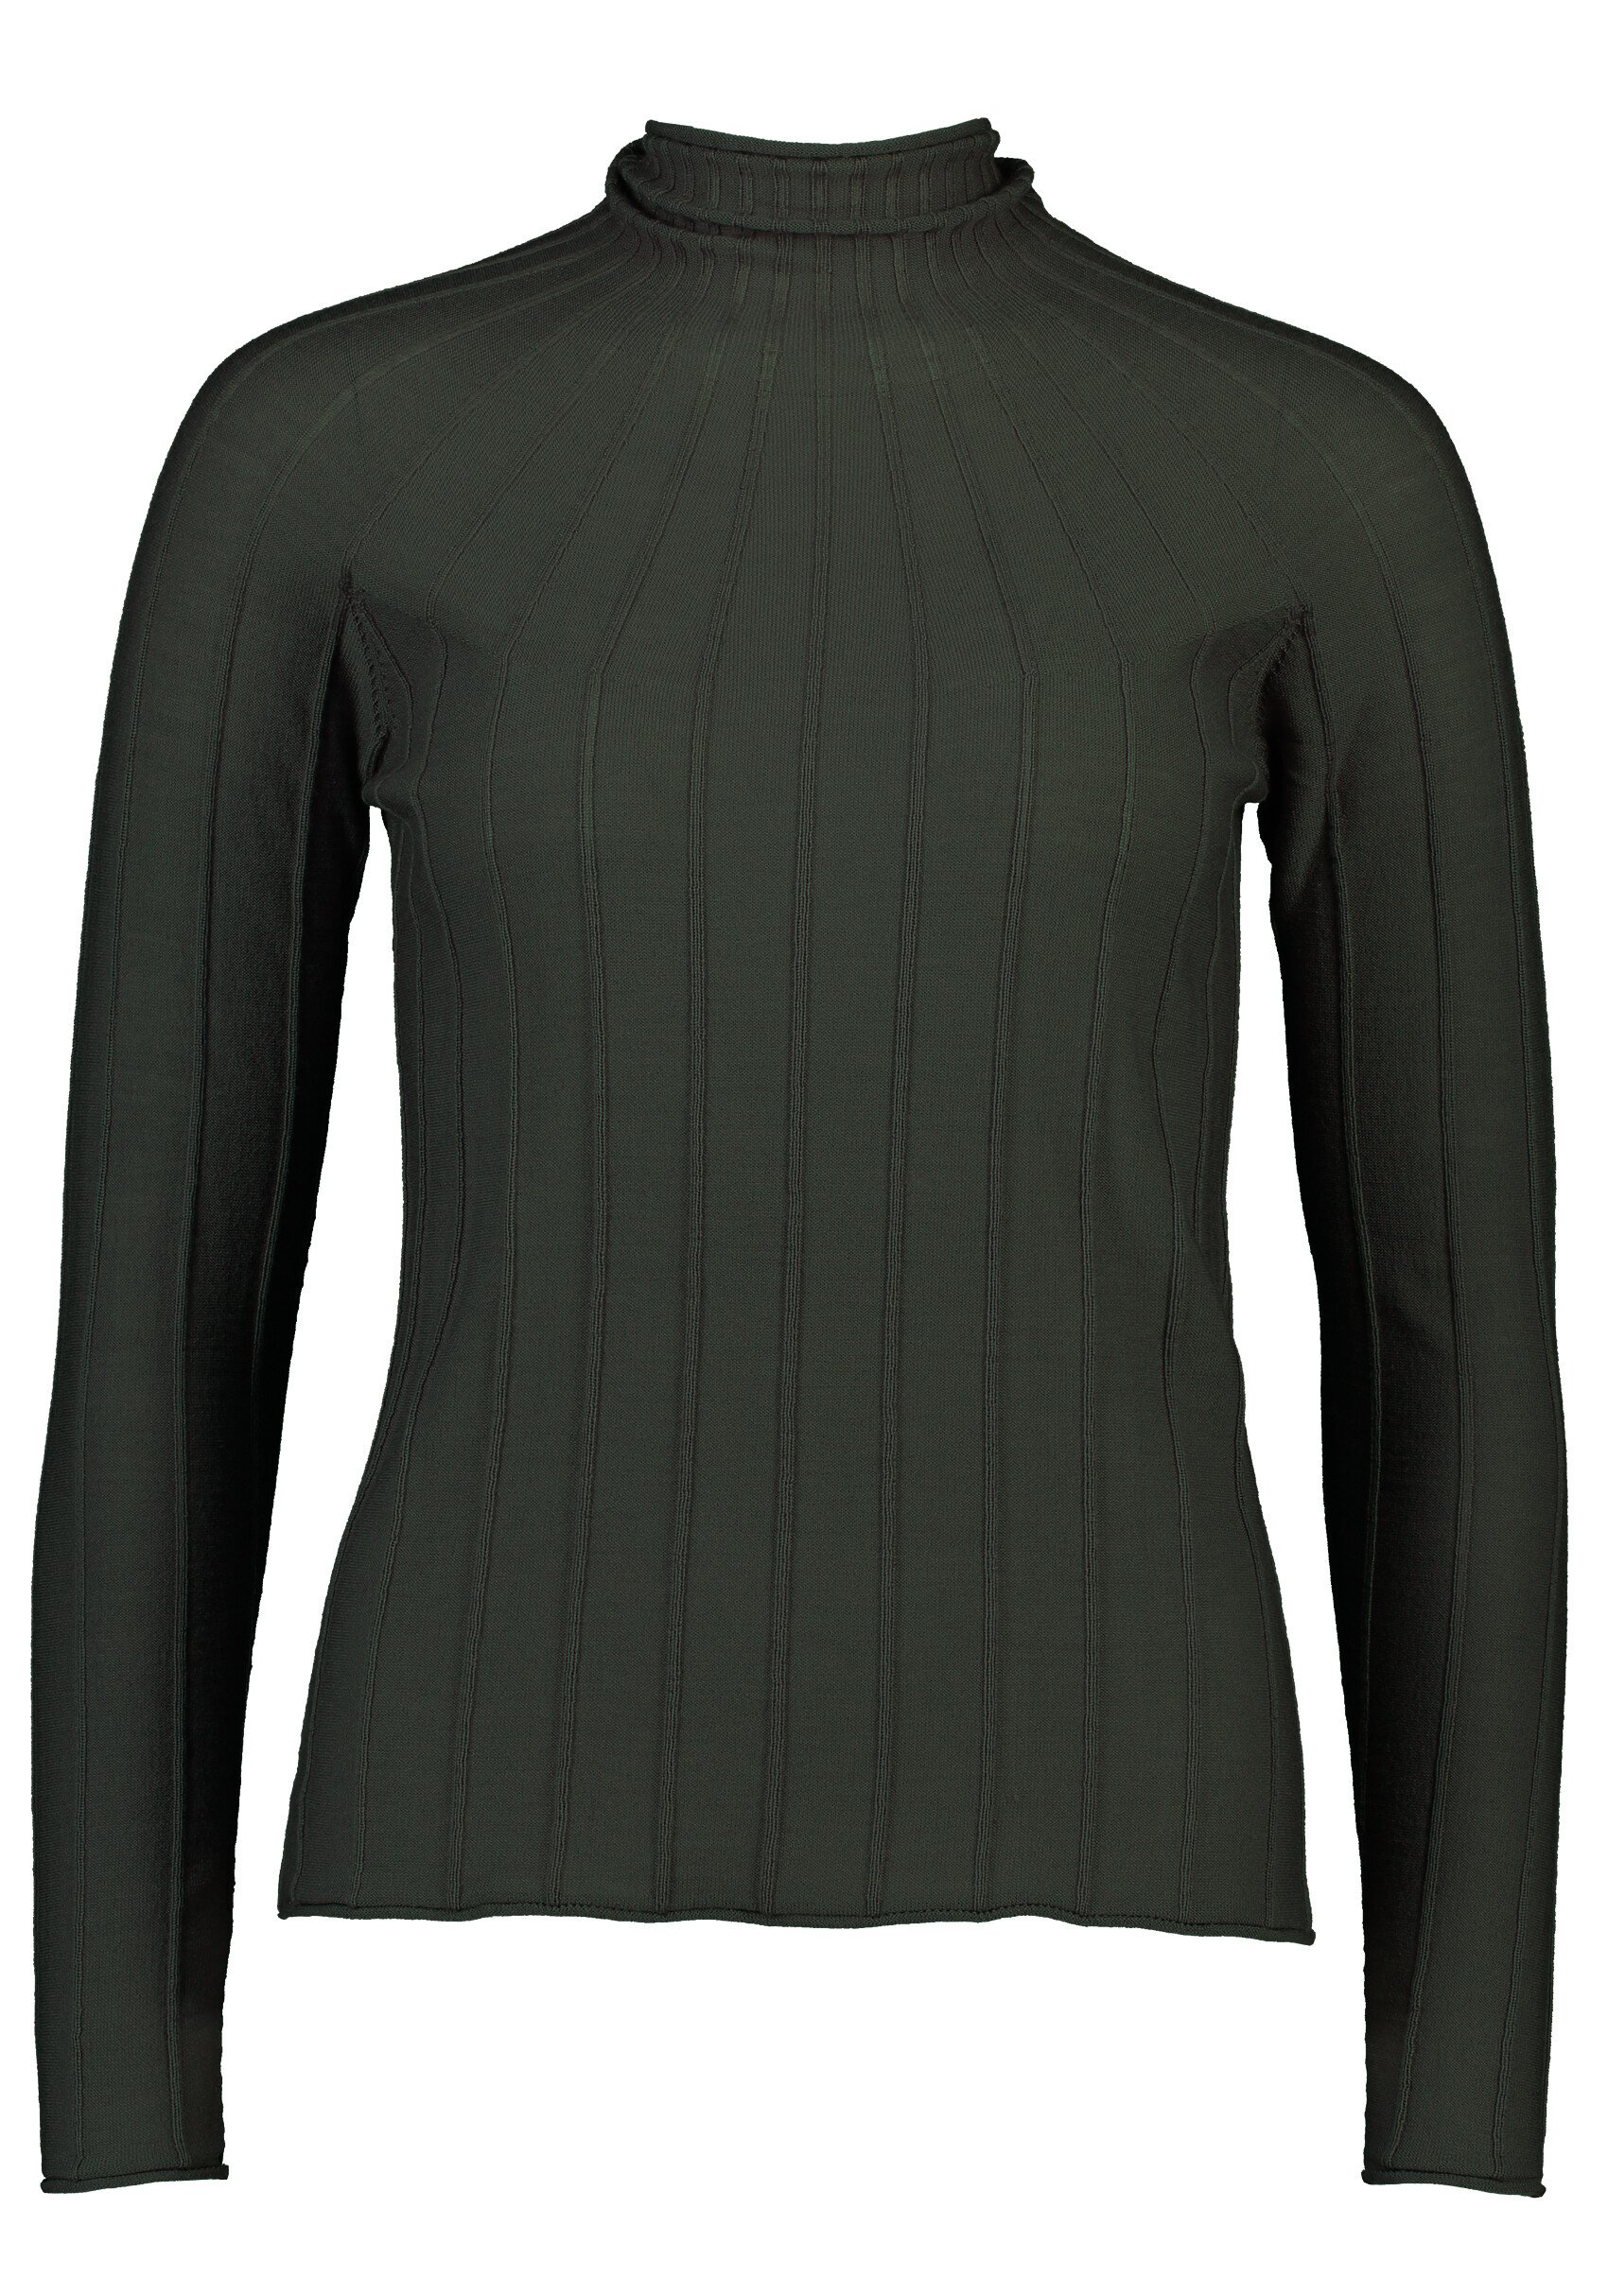 RADIAL SKIVVY (ARMY)- STANDARD ISSUE AW20 Boxing Day Sale